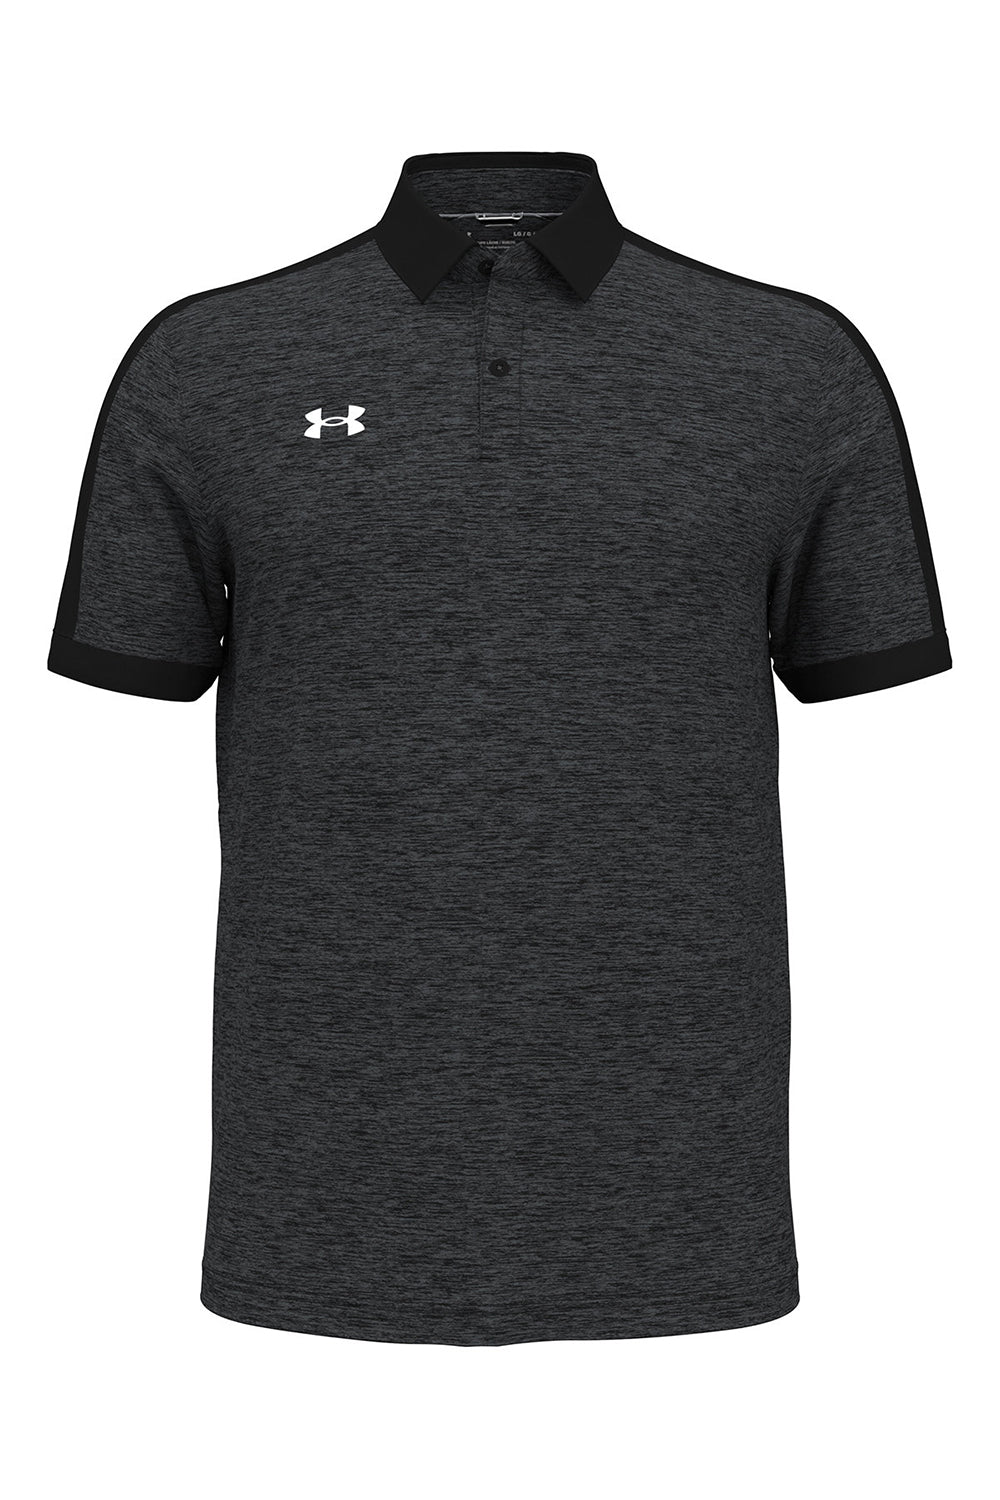 Under Armour 1376907 Mens Trophy Level Moisture Wicking Short Sleeve Polo Shirt Black Flat Front